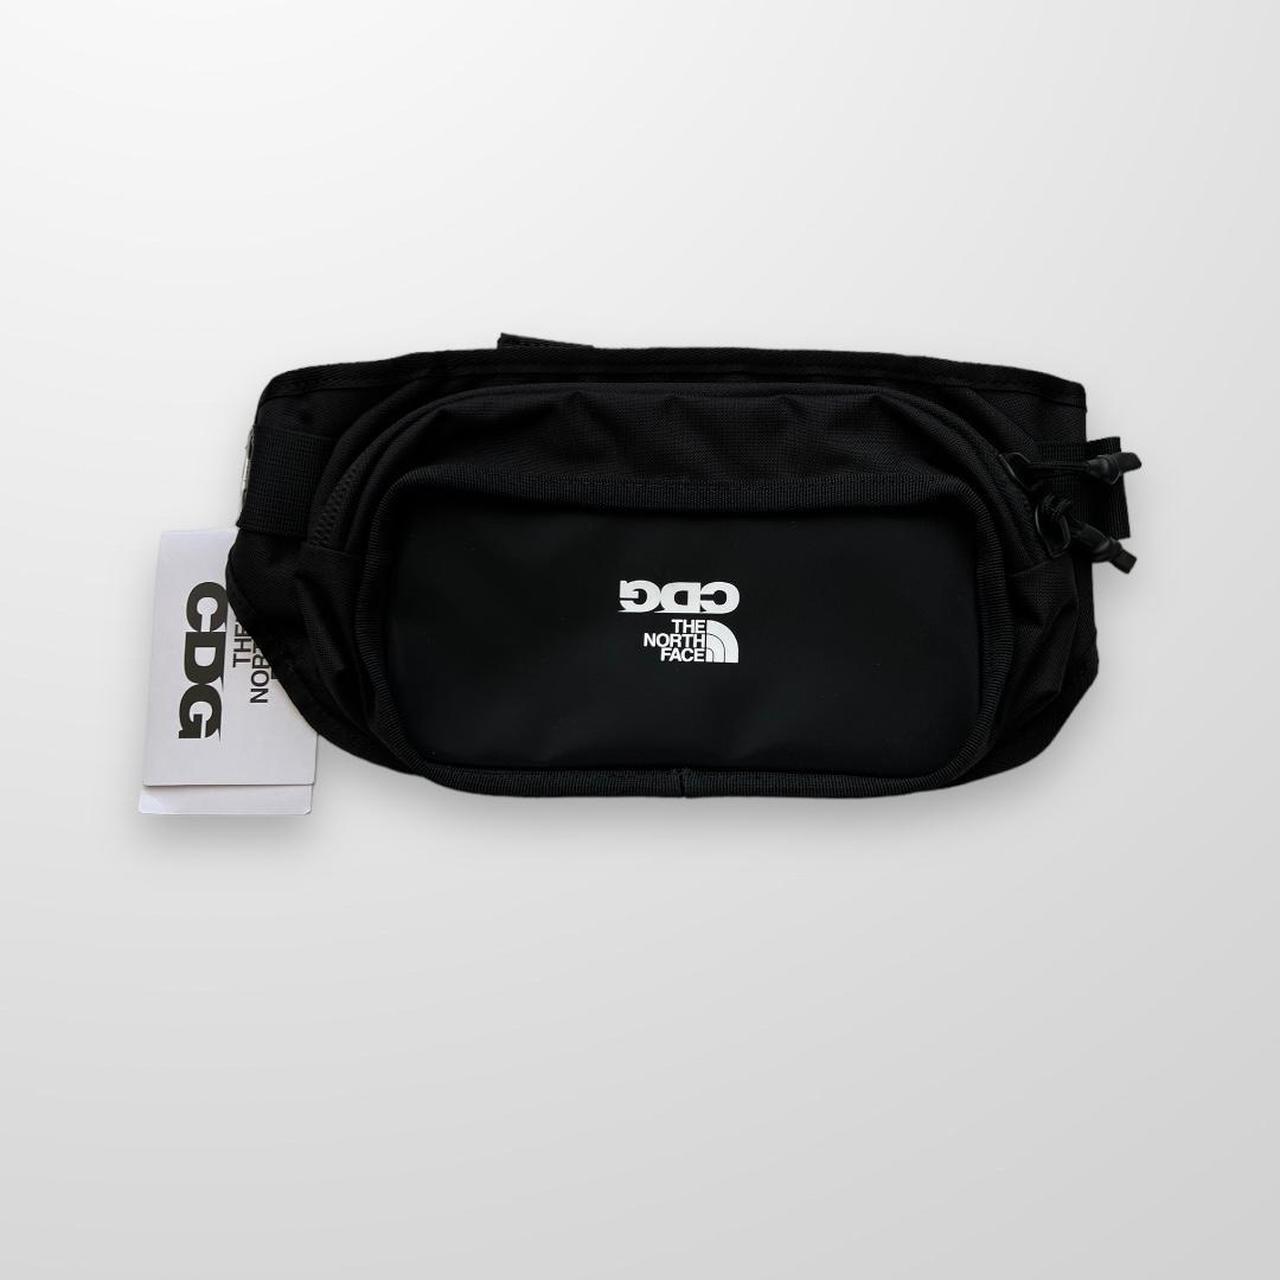 The North Face X CDG Bum Bag In Black One Size... - Depop